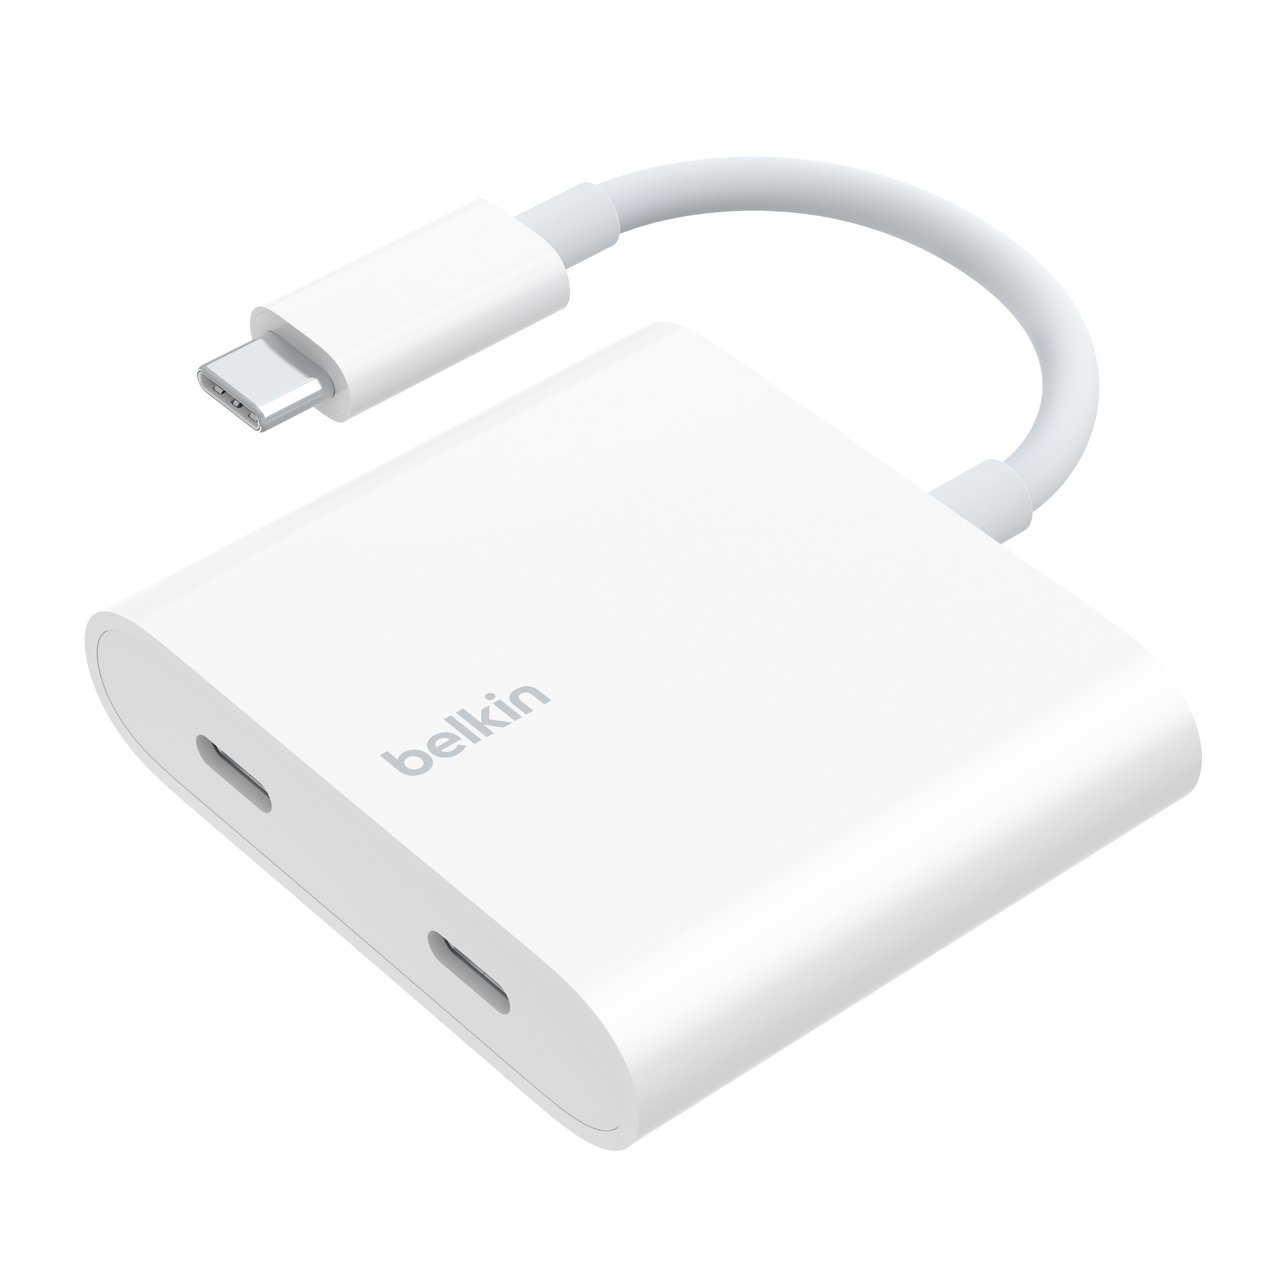 Dual-port USB-C adapter, 100W USB-C Power Delivery